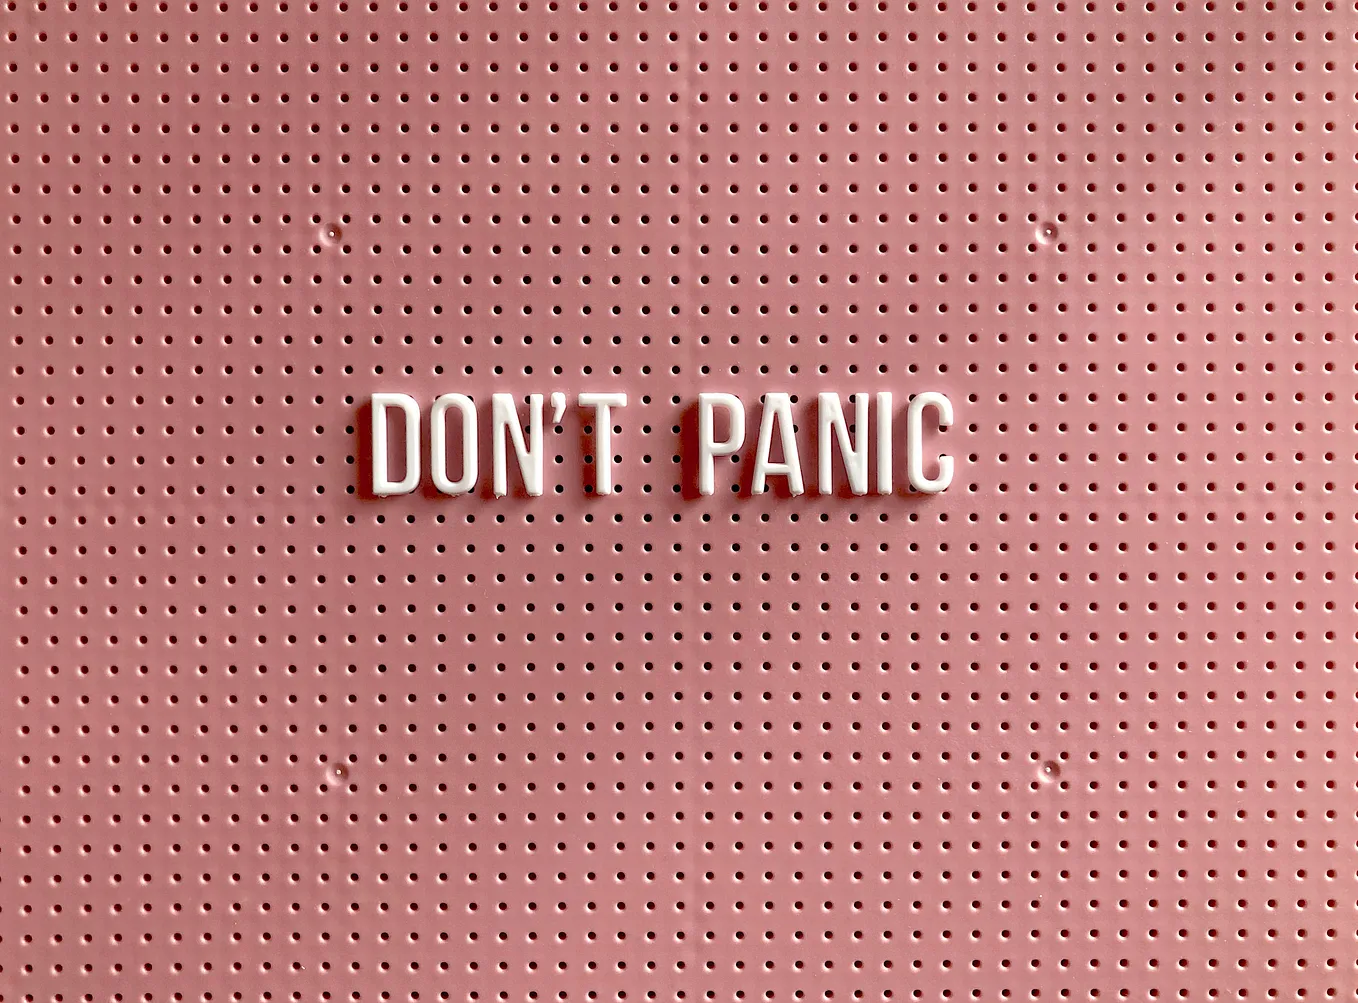 All-caps letters spelling out “Don’t panic” in petal pink on a blush-colored cork board.